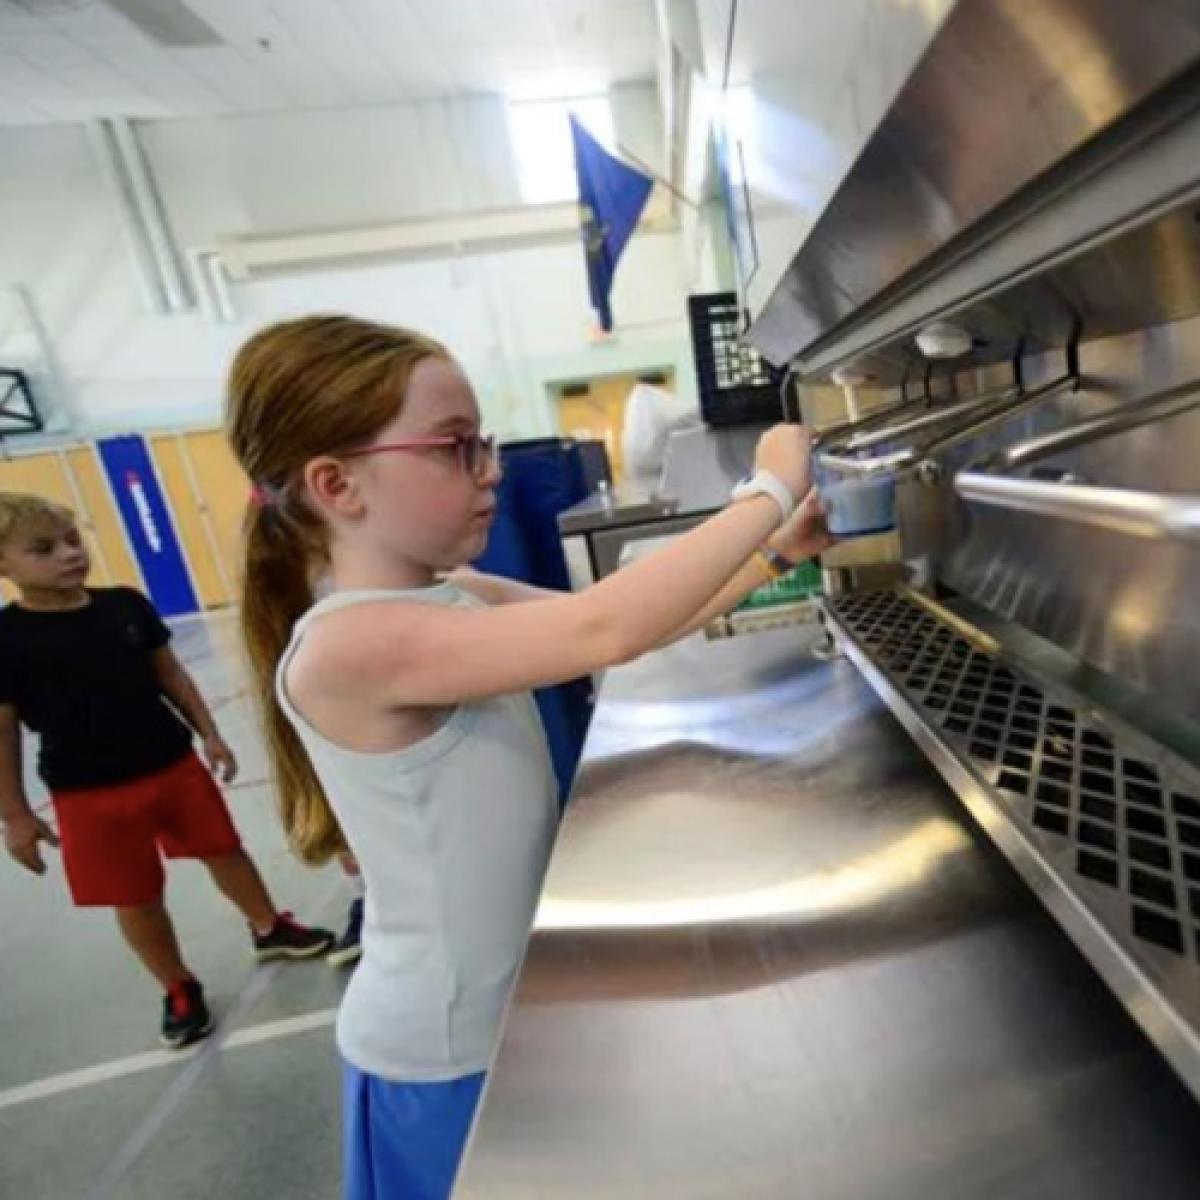 a student dispenses milk from a stainless steel machine